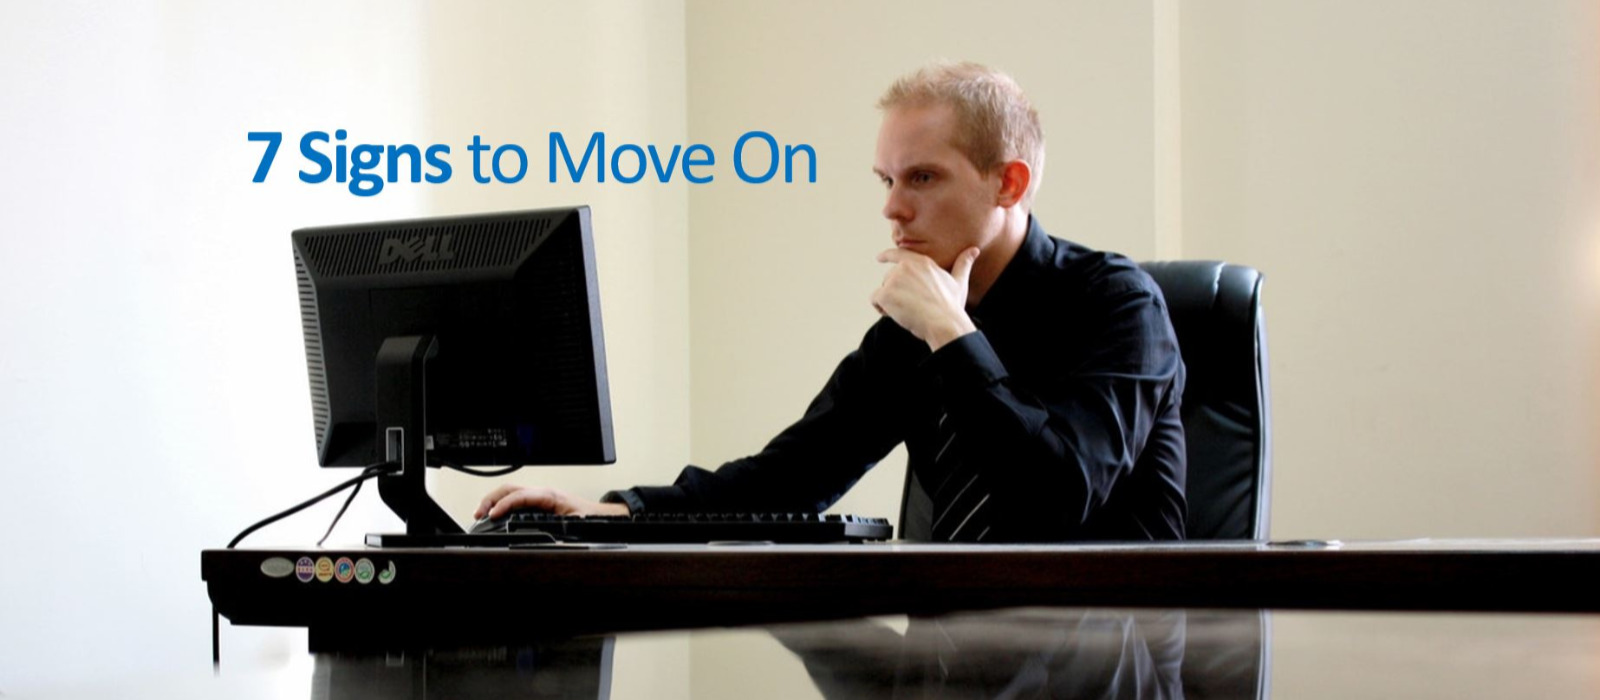 7 signs to Move on. recruitertimes hiringplug